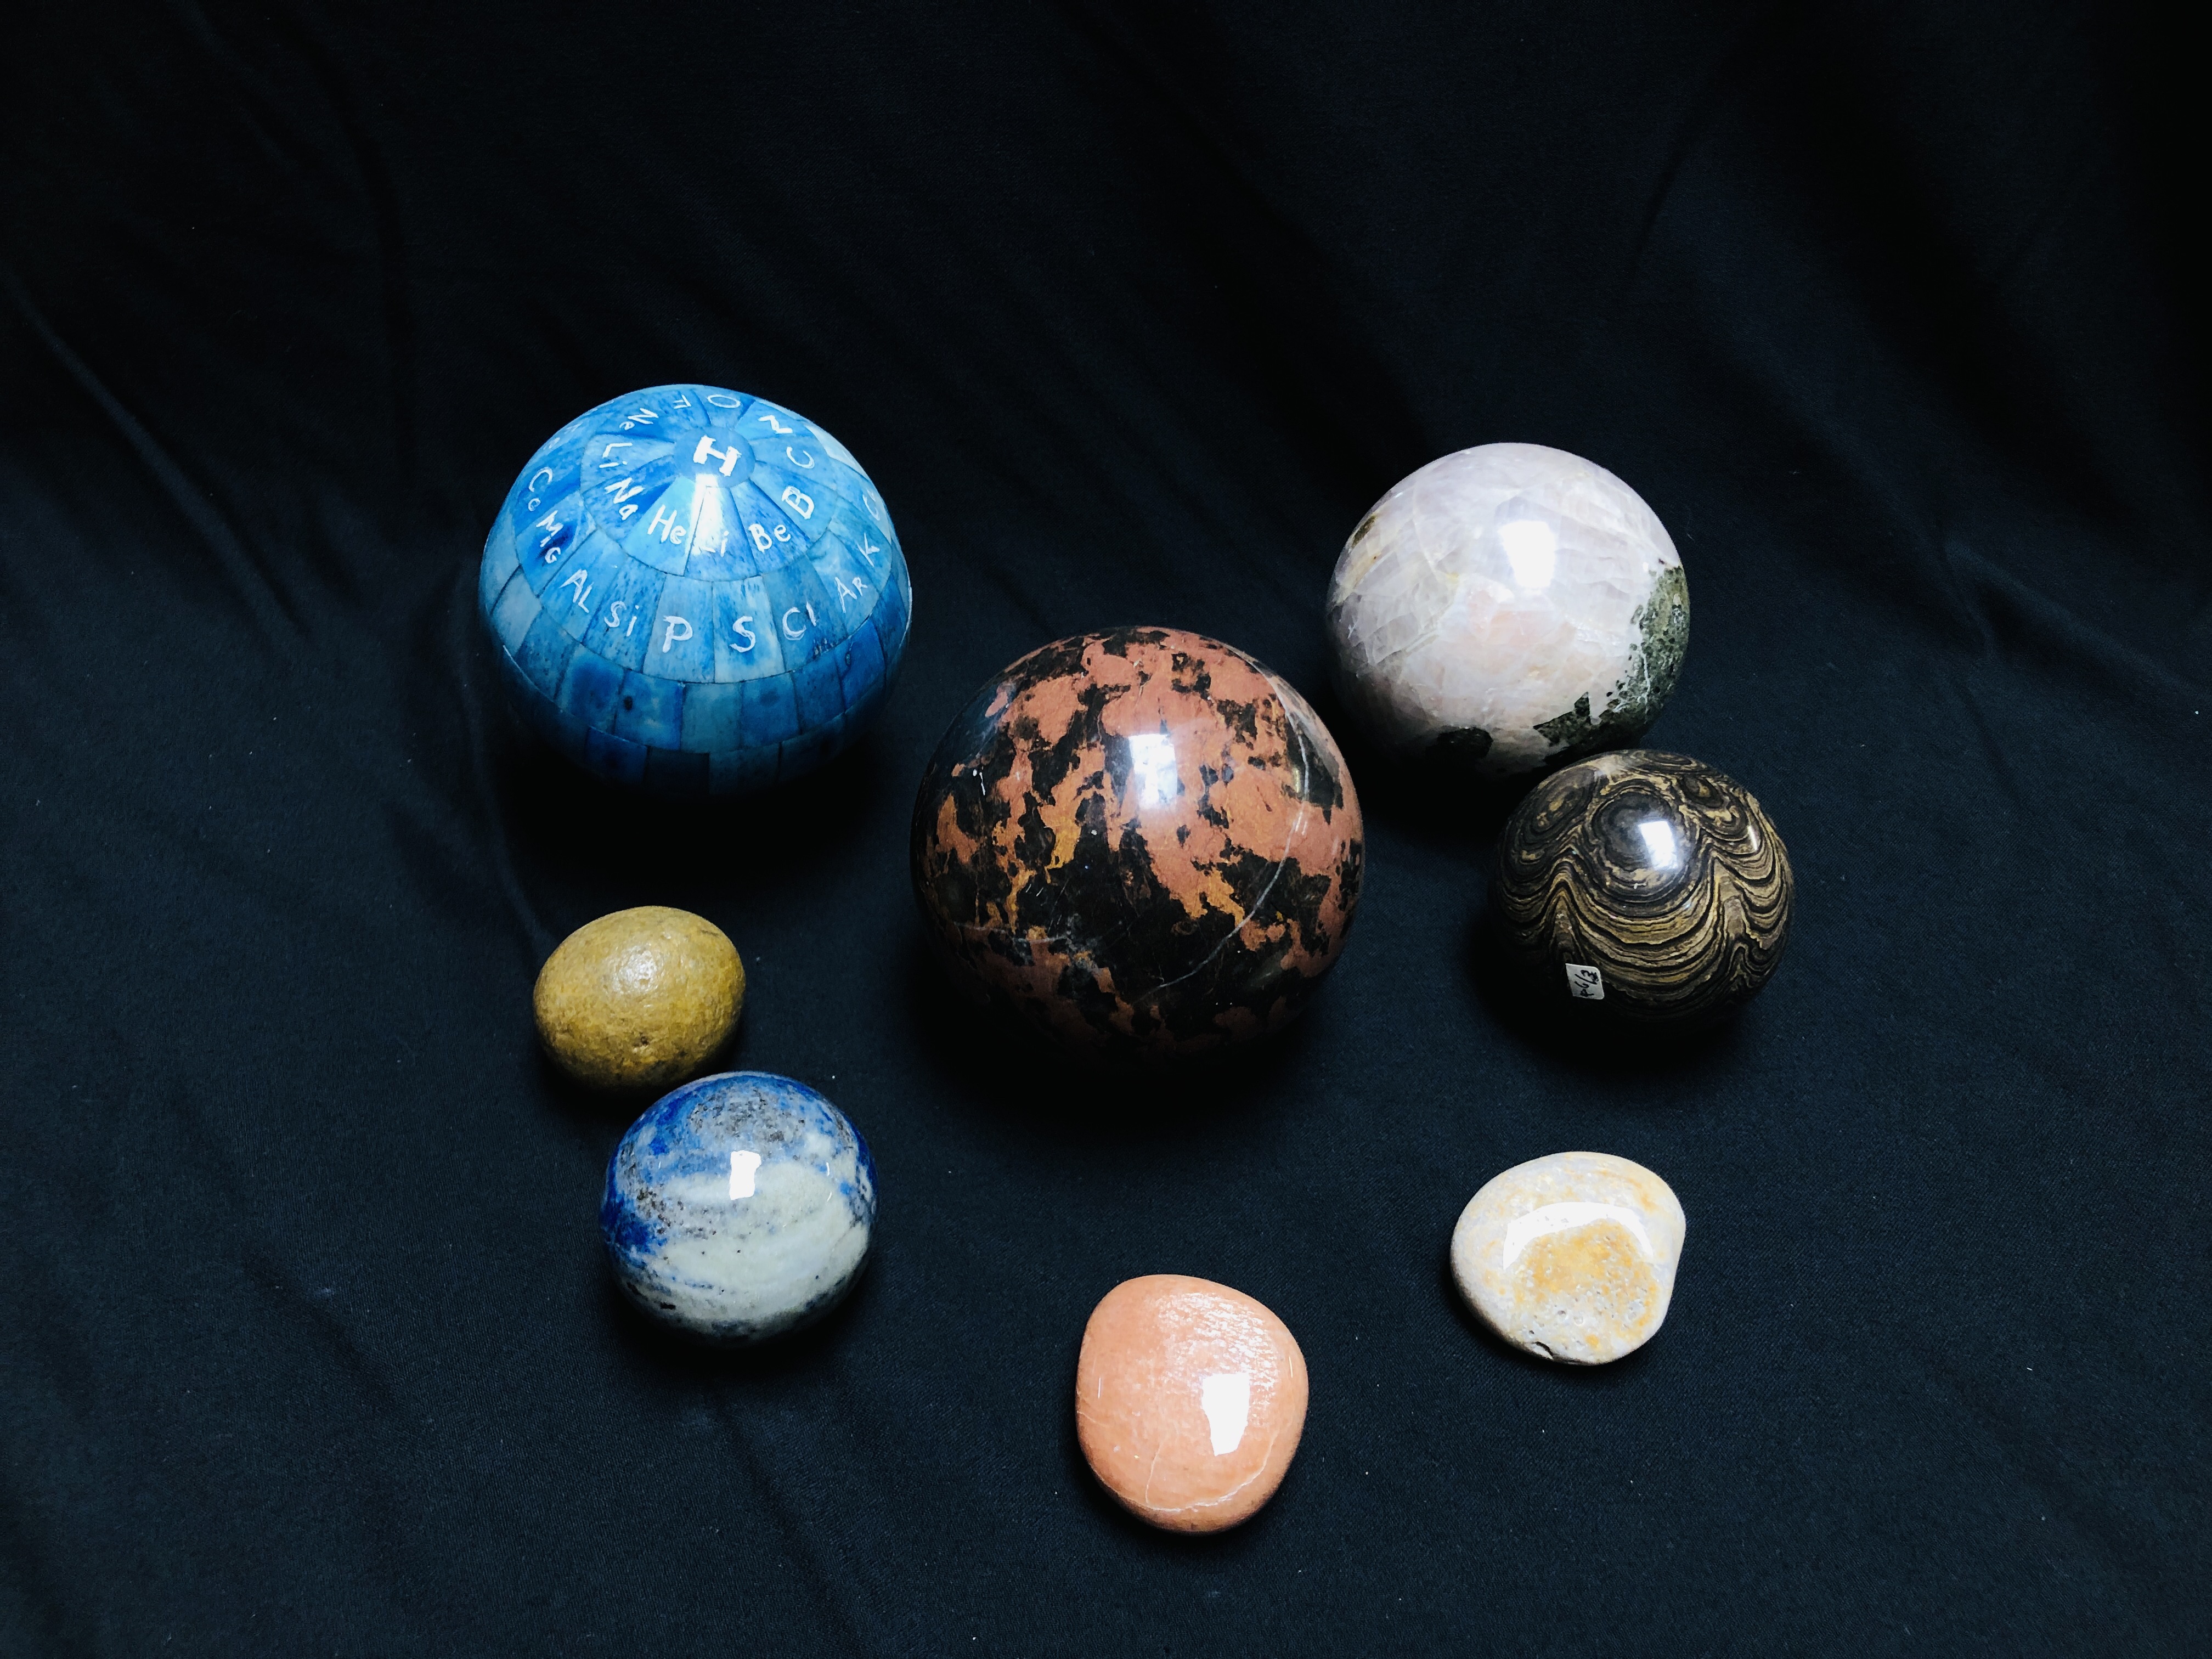 A COLLECTION OF 4 HARD STONE POLISHED SPHERES TO INCLUDE FLUORITE + ONE OTHER ALONG WITH 3 POLISHED